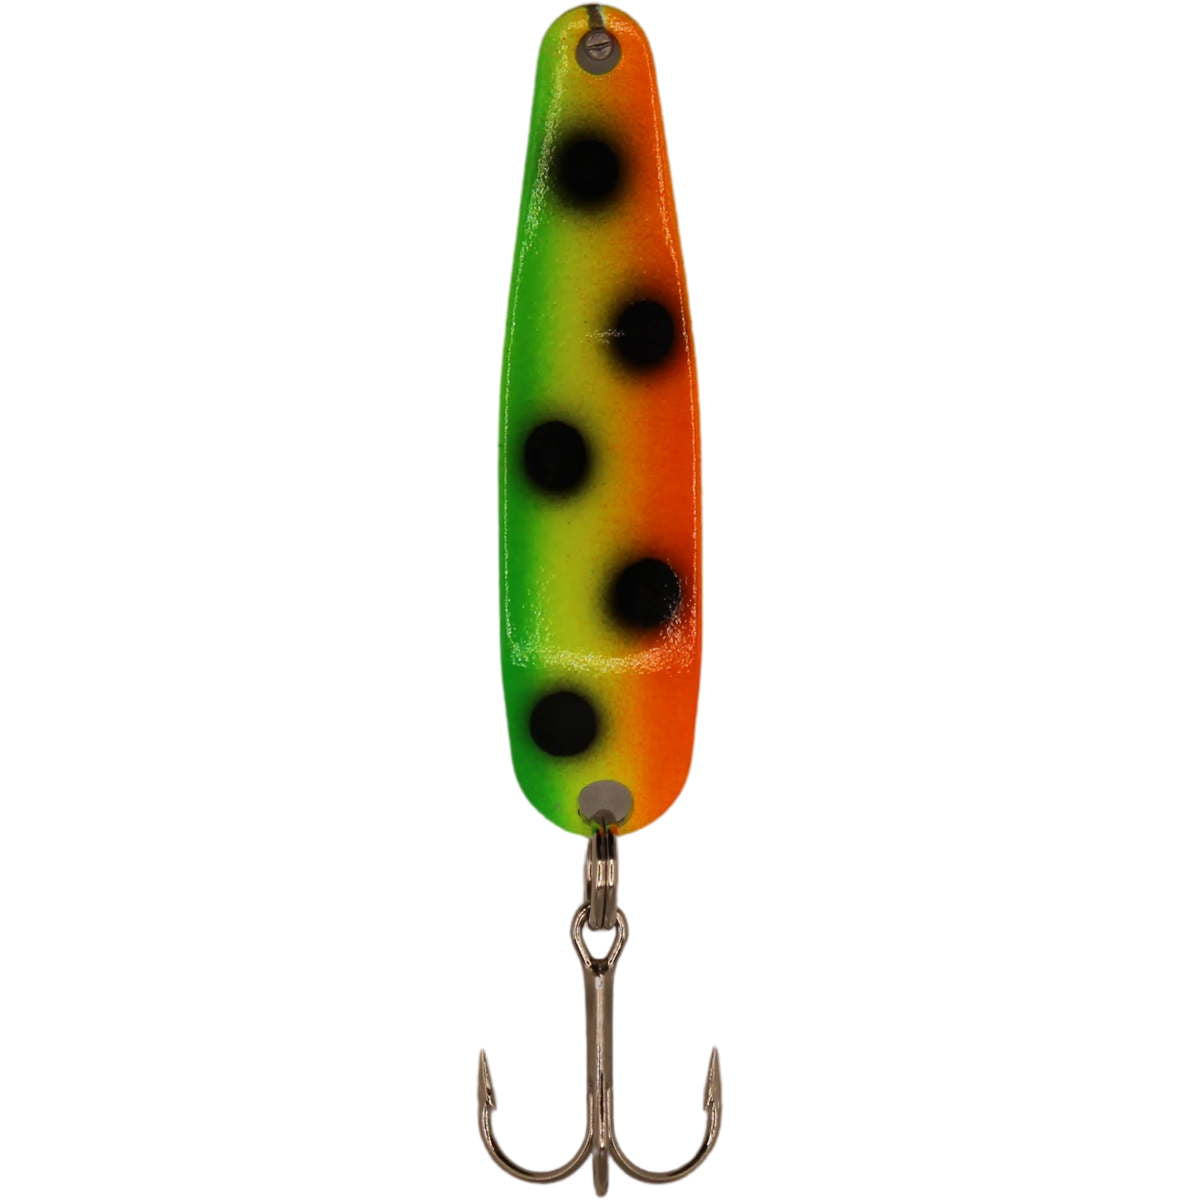 Photo of Advance Tackle Michigan Stinger Scorpion Spoon for sale at United Tackle Shops